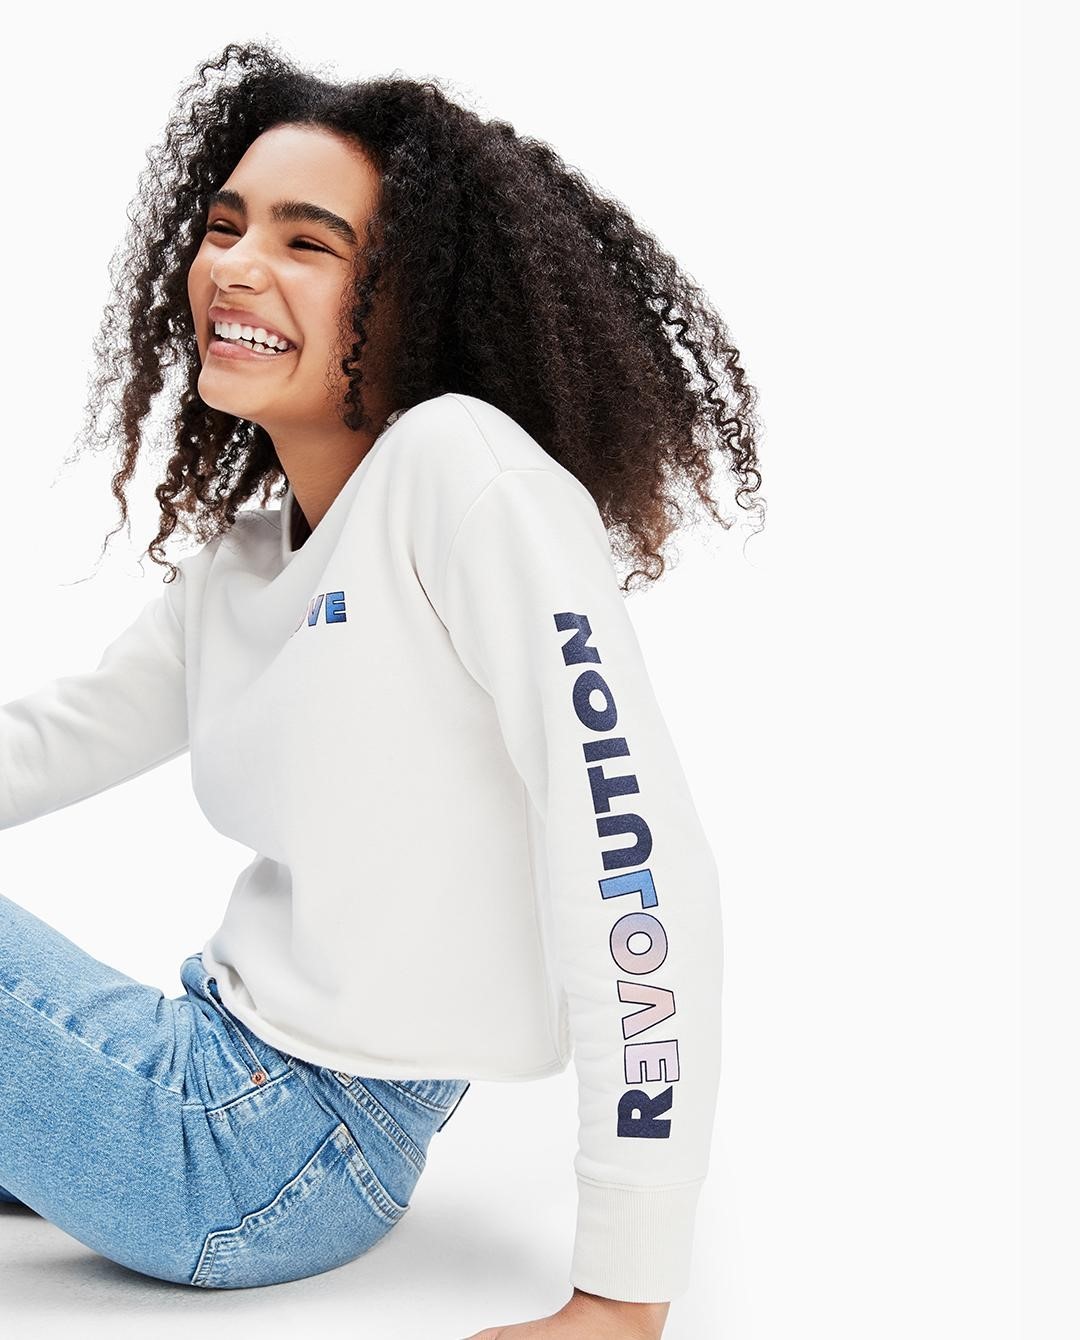 Gap Middle East - This generation is changing the way we care for the planet. That's why we made our whole Teen collection seriously sustainable ♻️ Shop our new Teen collection online.